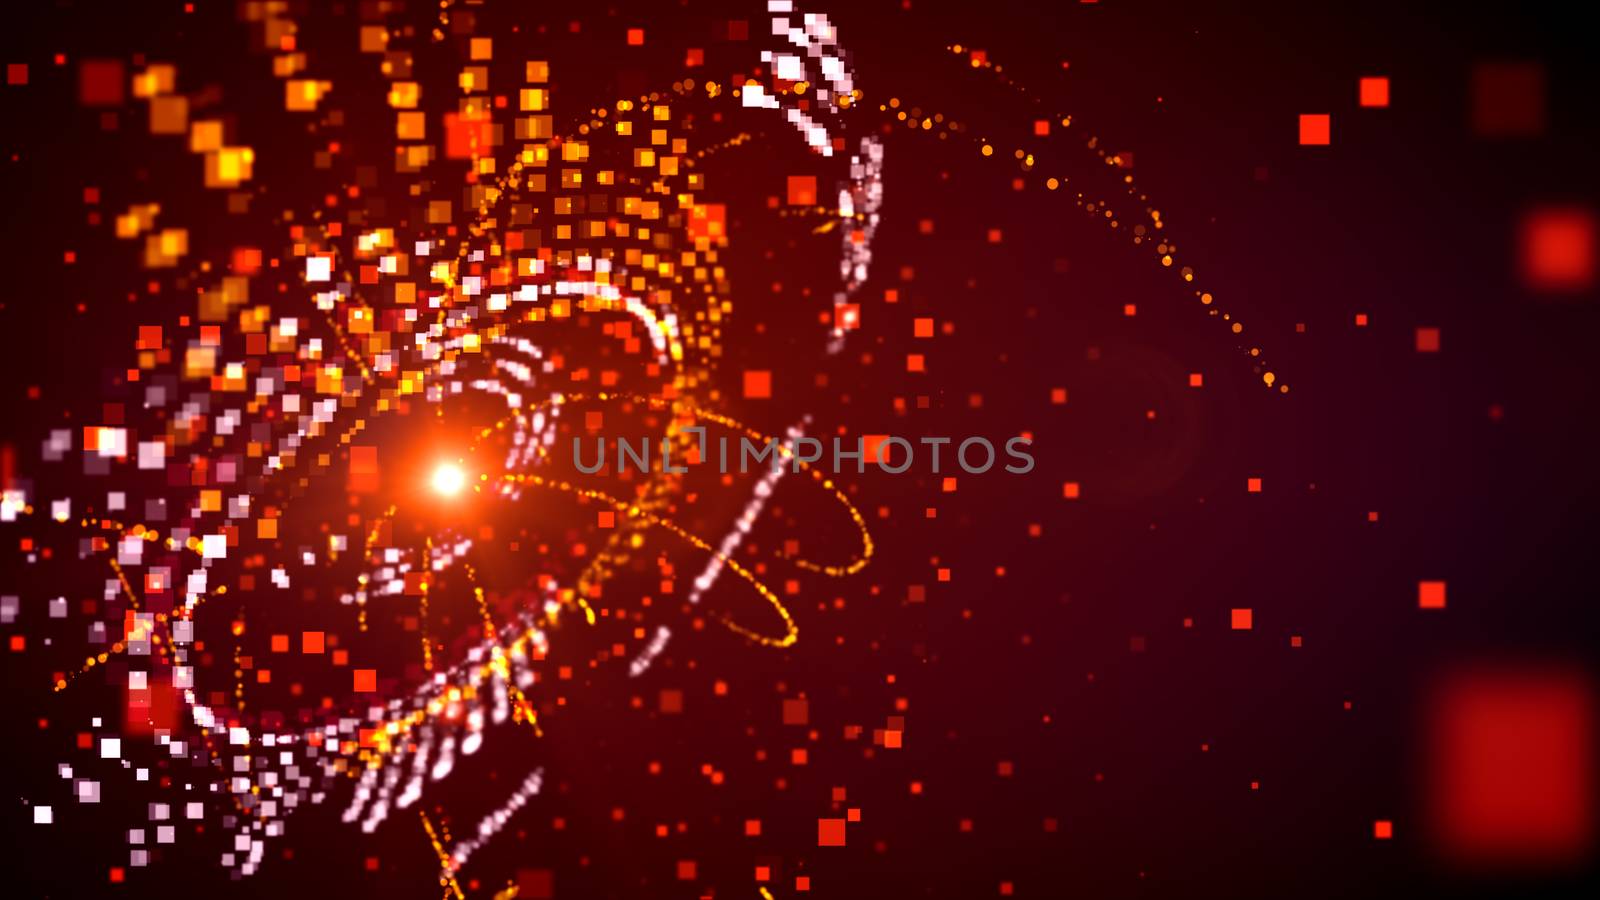 Imposing 3d illustration of a sphere with many shining orange circles inside with particle waves spinning around in the dark purple background. It looks cheerful and optimistic